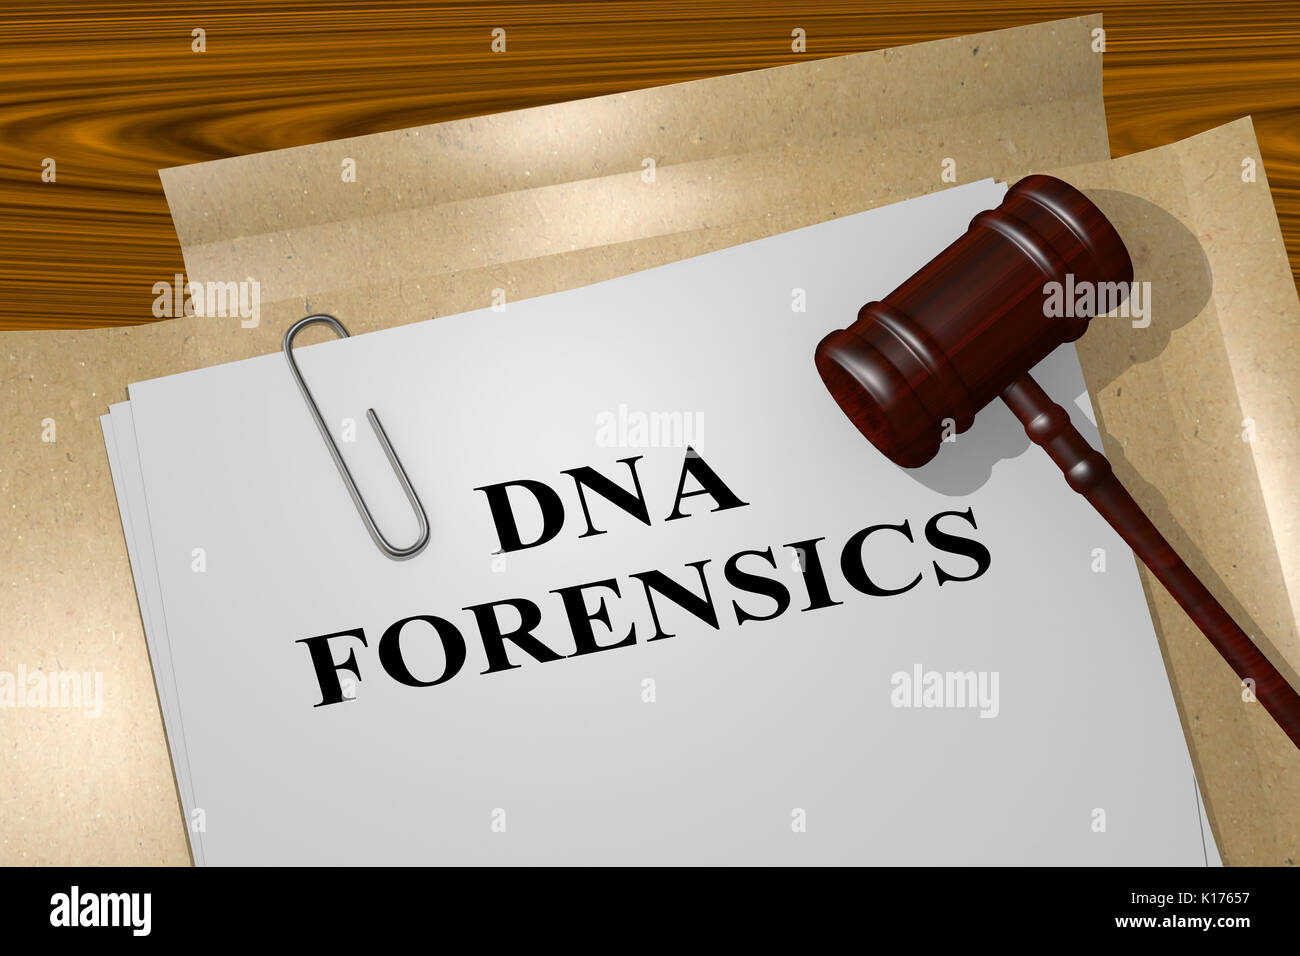 3D illustration of 'DNA FORENSICS' title on Legal Documents. Legal concept. Stock Photo